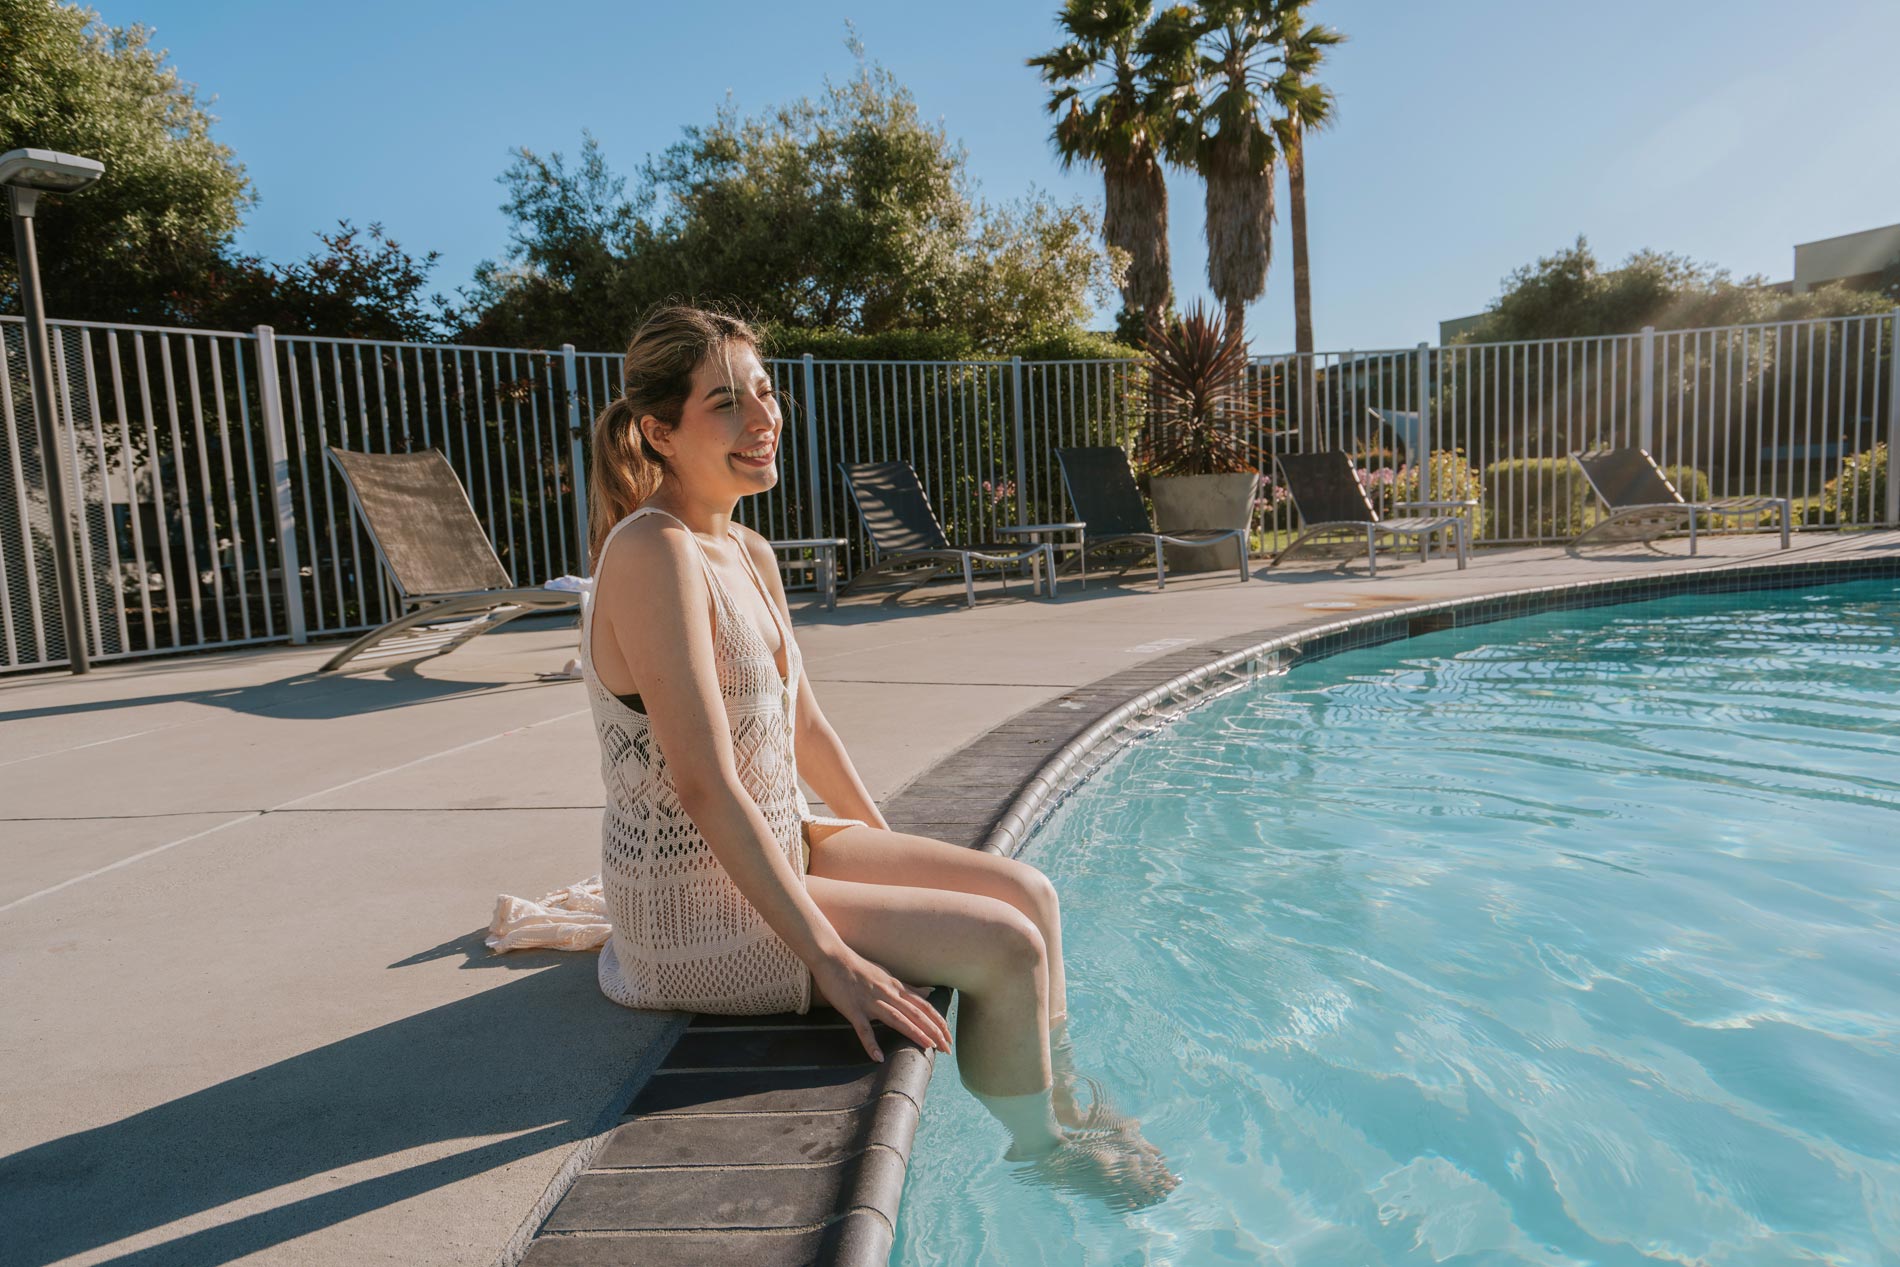 CitySouth woman sits on edge of pool